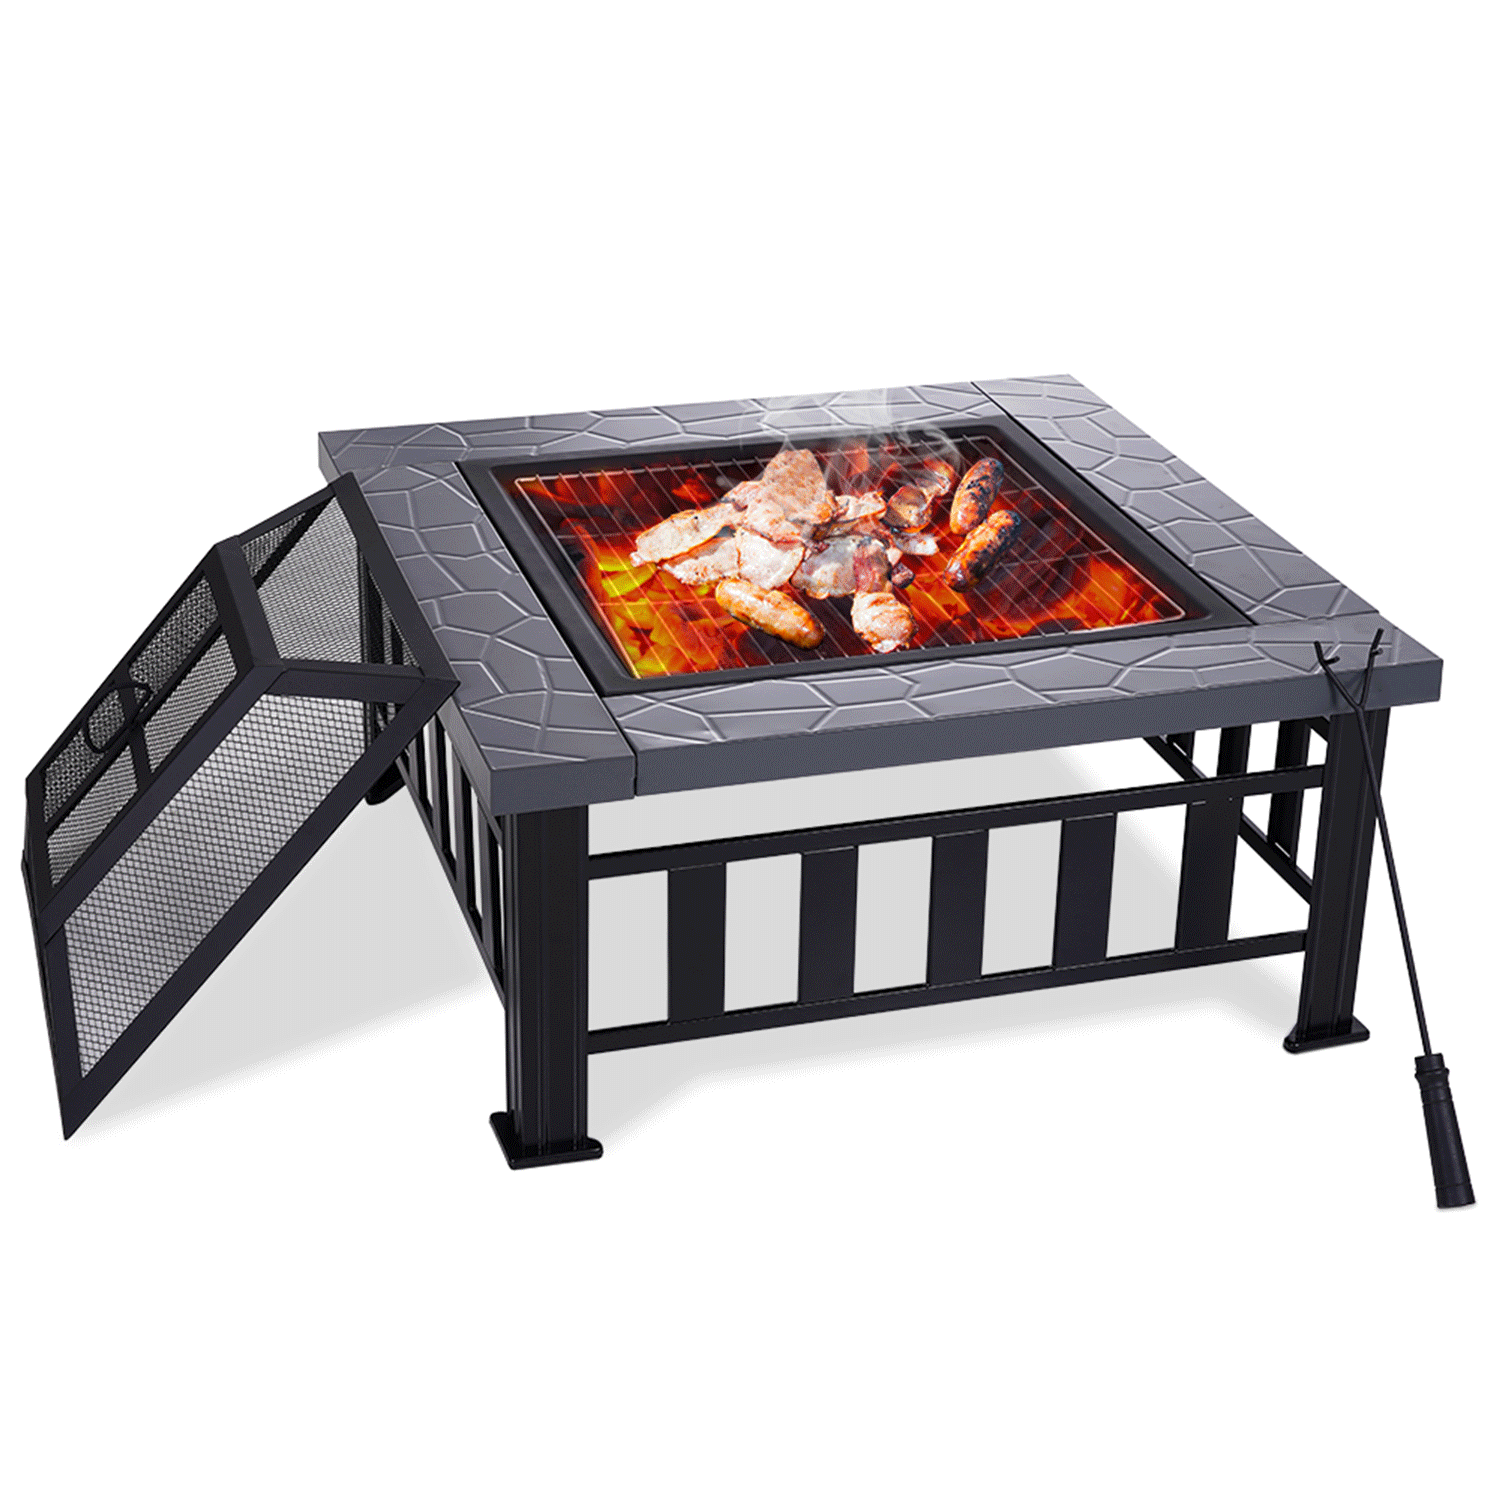 Bbq Square Wood Burning Firepit Table, Free Standing Fire Pit